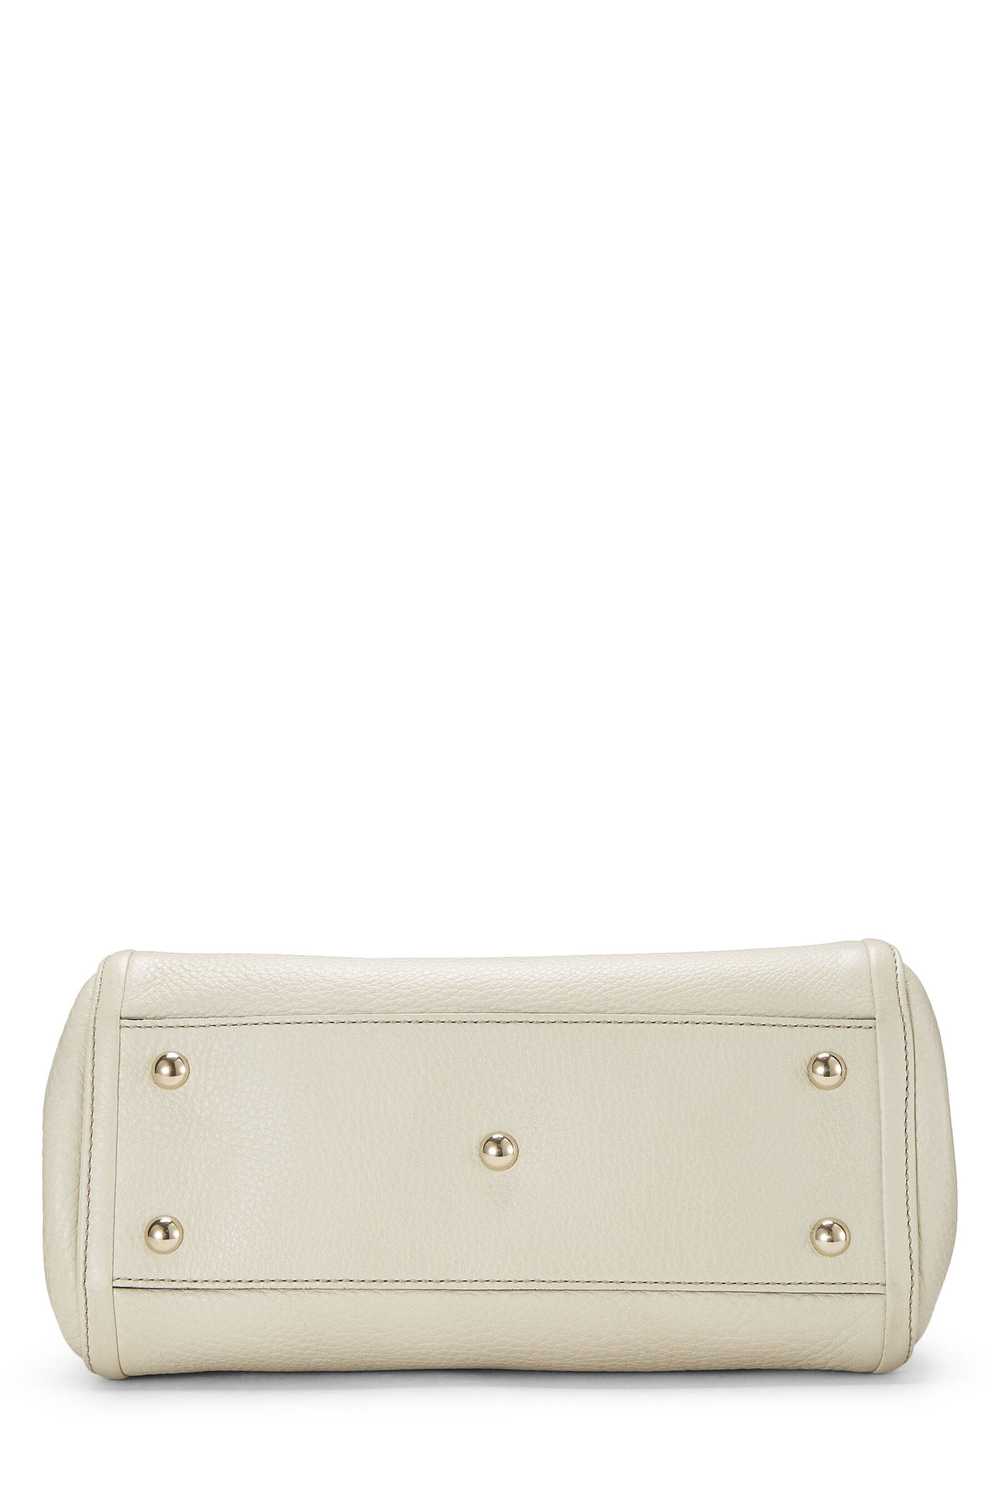 White Leather Soho Convertible Shoulder Bag Small - image 5